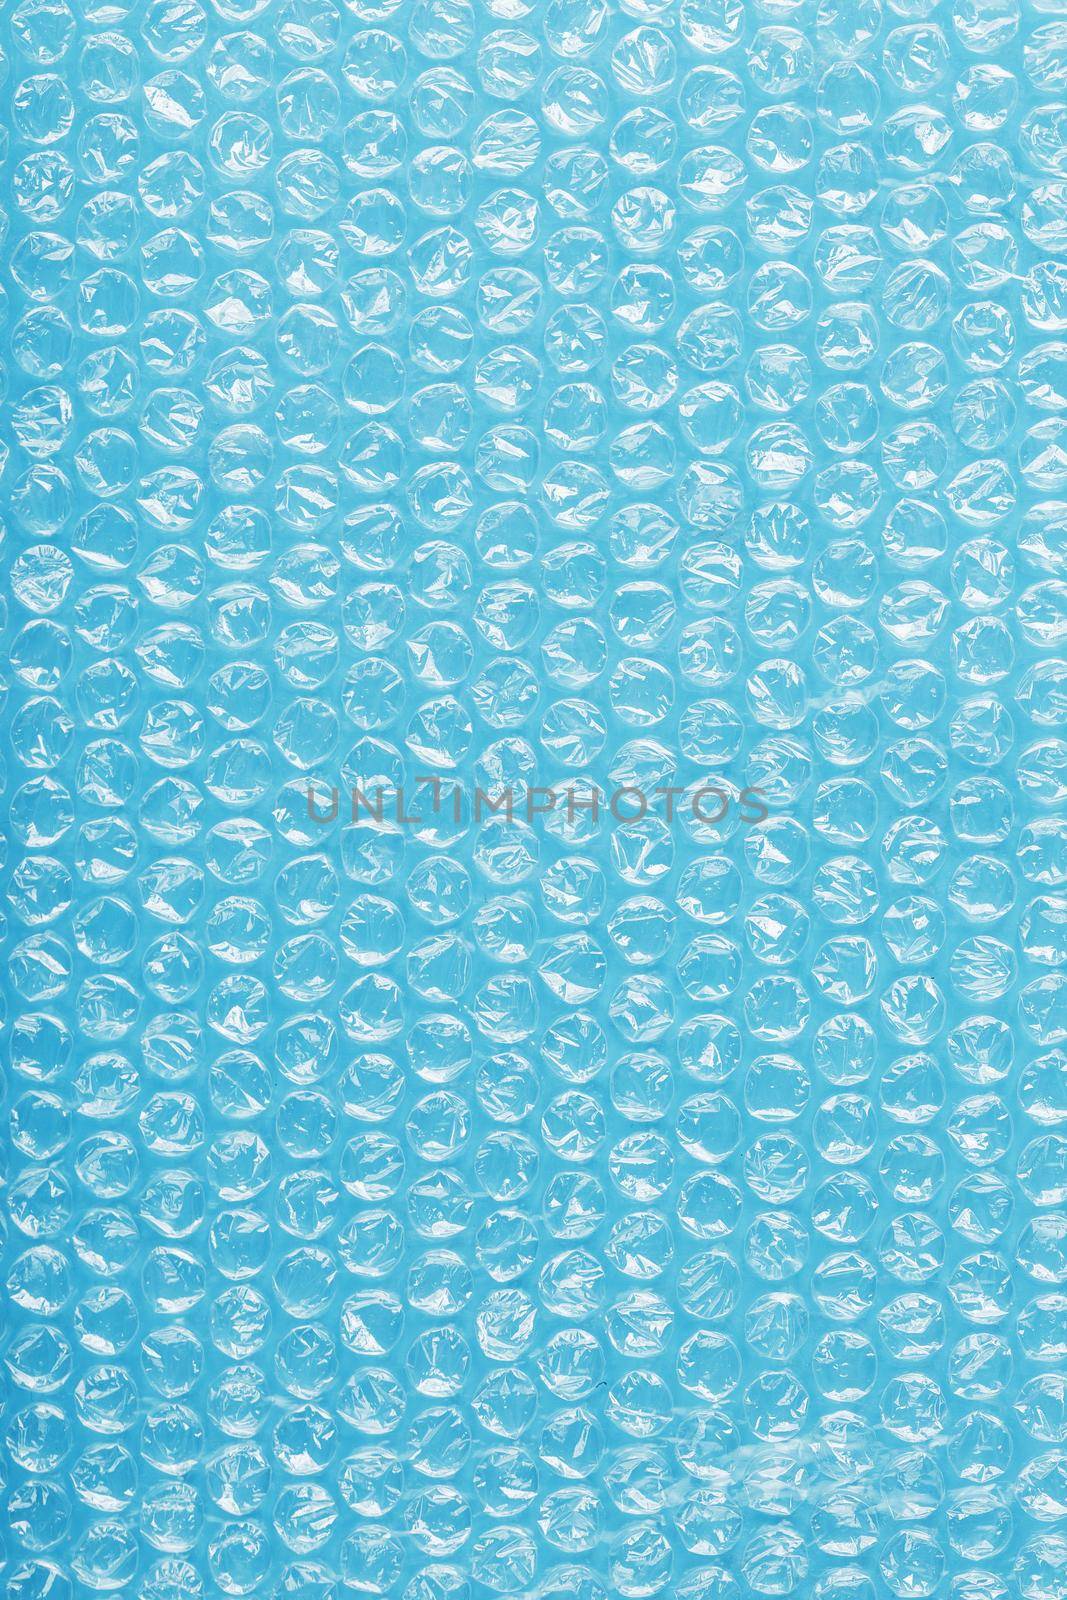 The texture of the packaging air-bubble film on a blue background in full screen